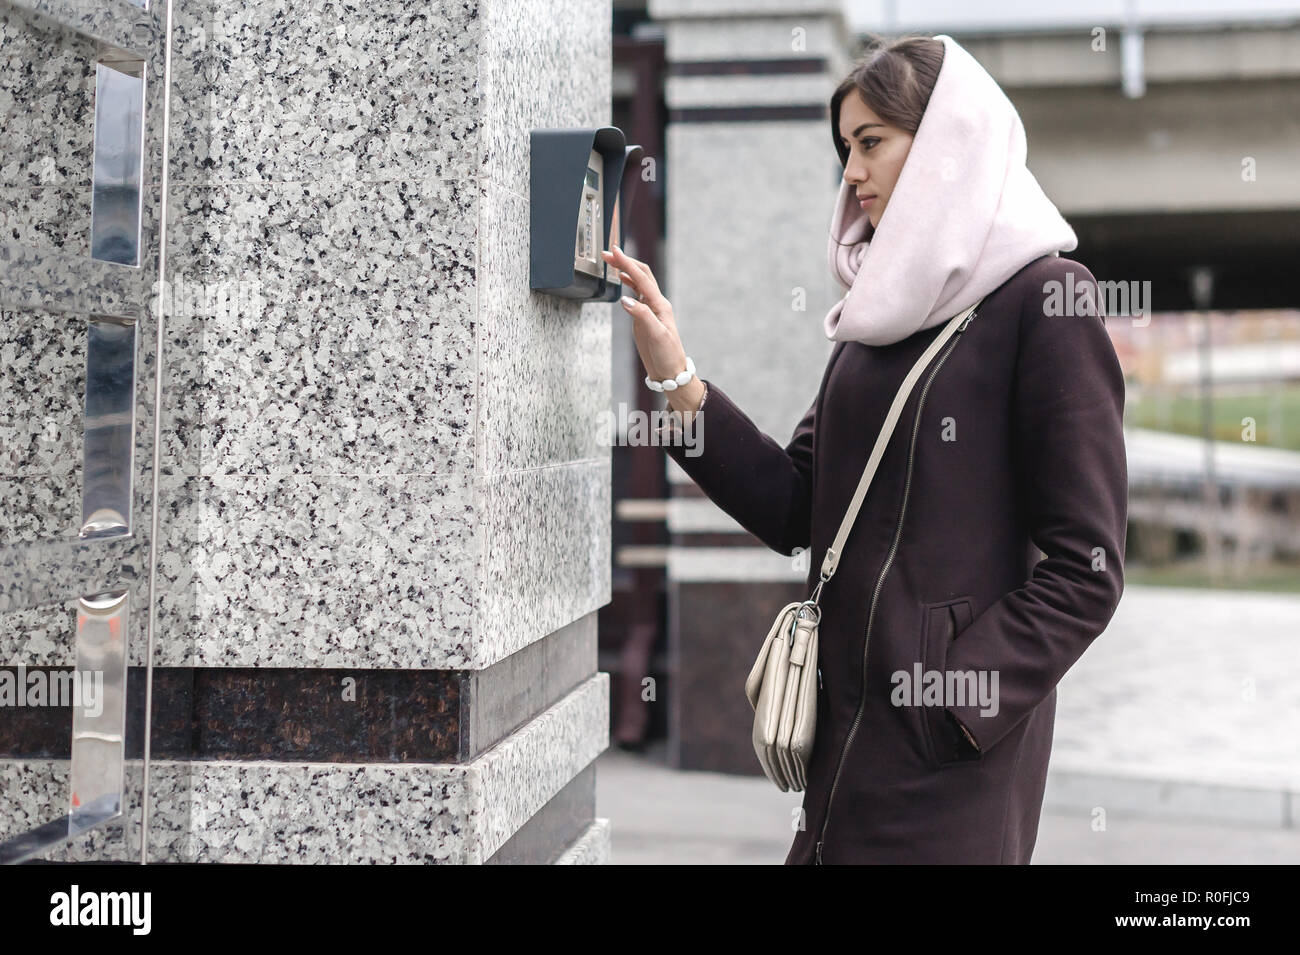 brunette woman calls into the intercom on the street, autumn day in warm clothes Stock Photo